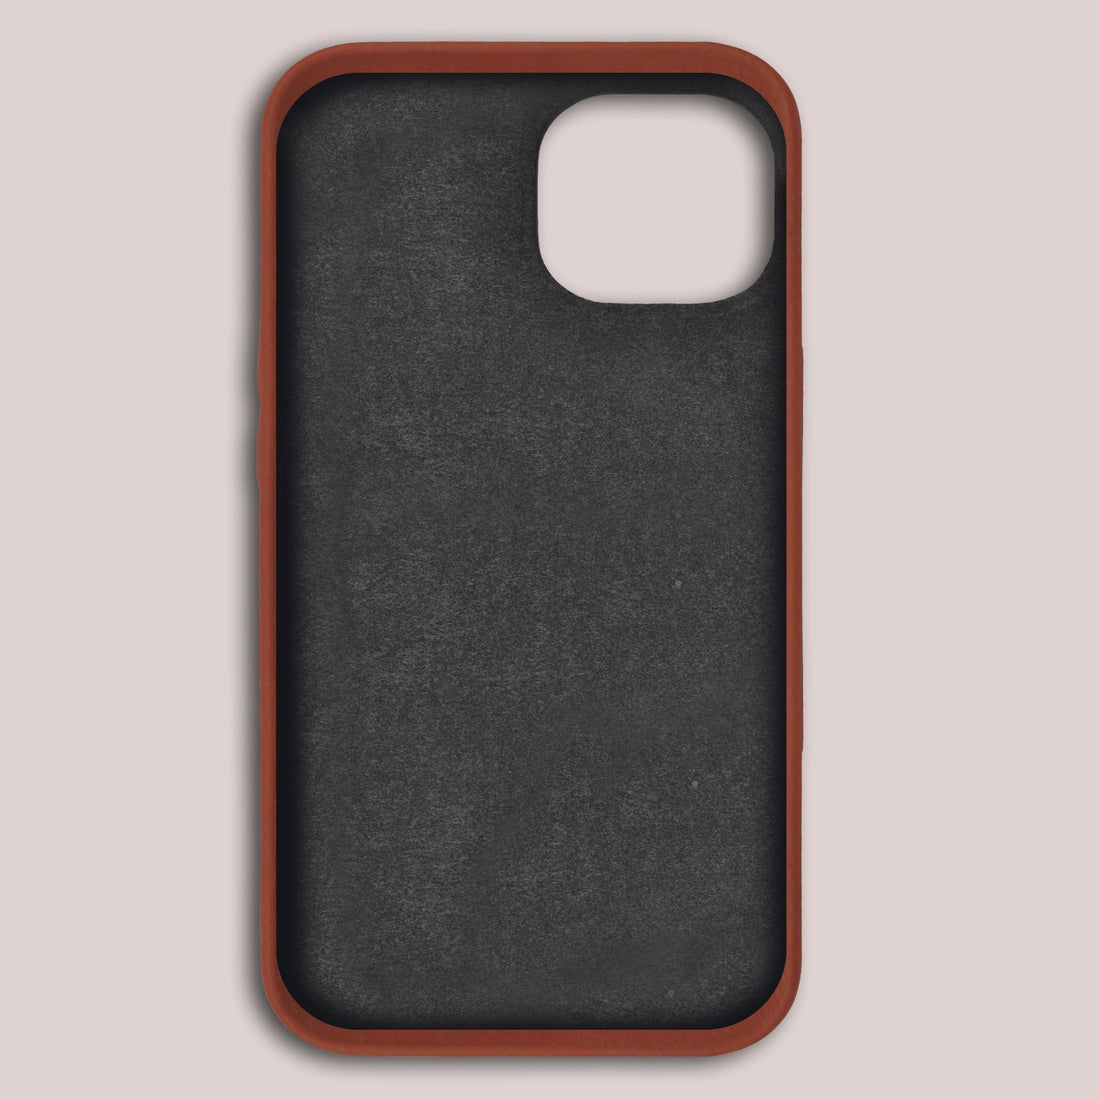 Baxter Card Case for iPhone 12 - Onyx Black